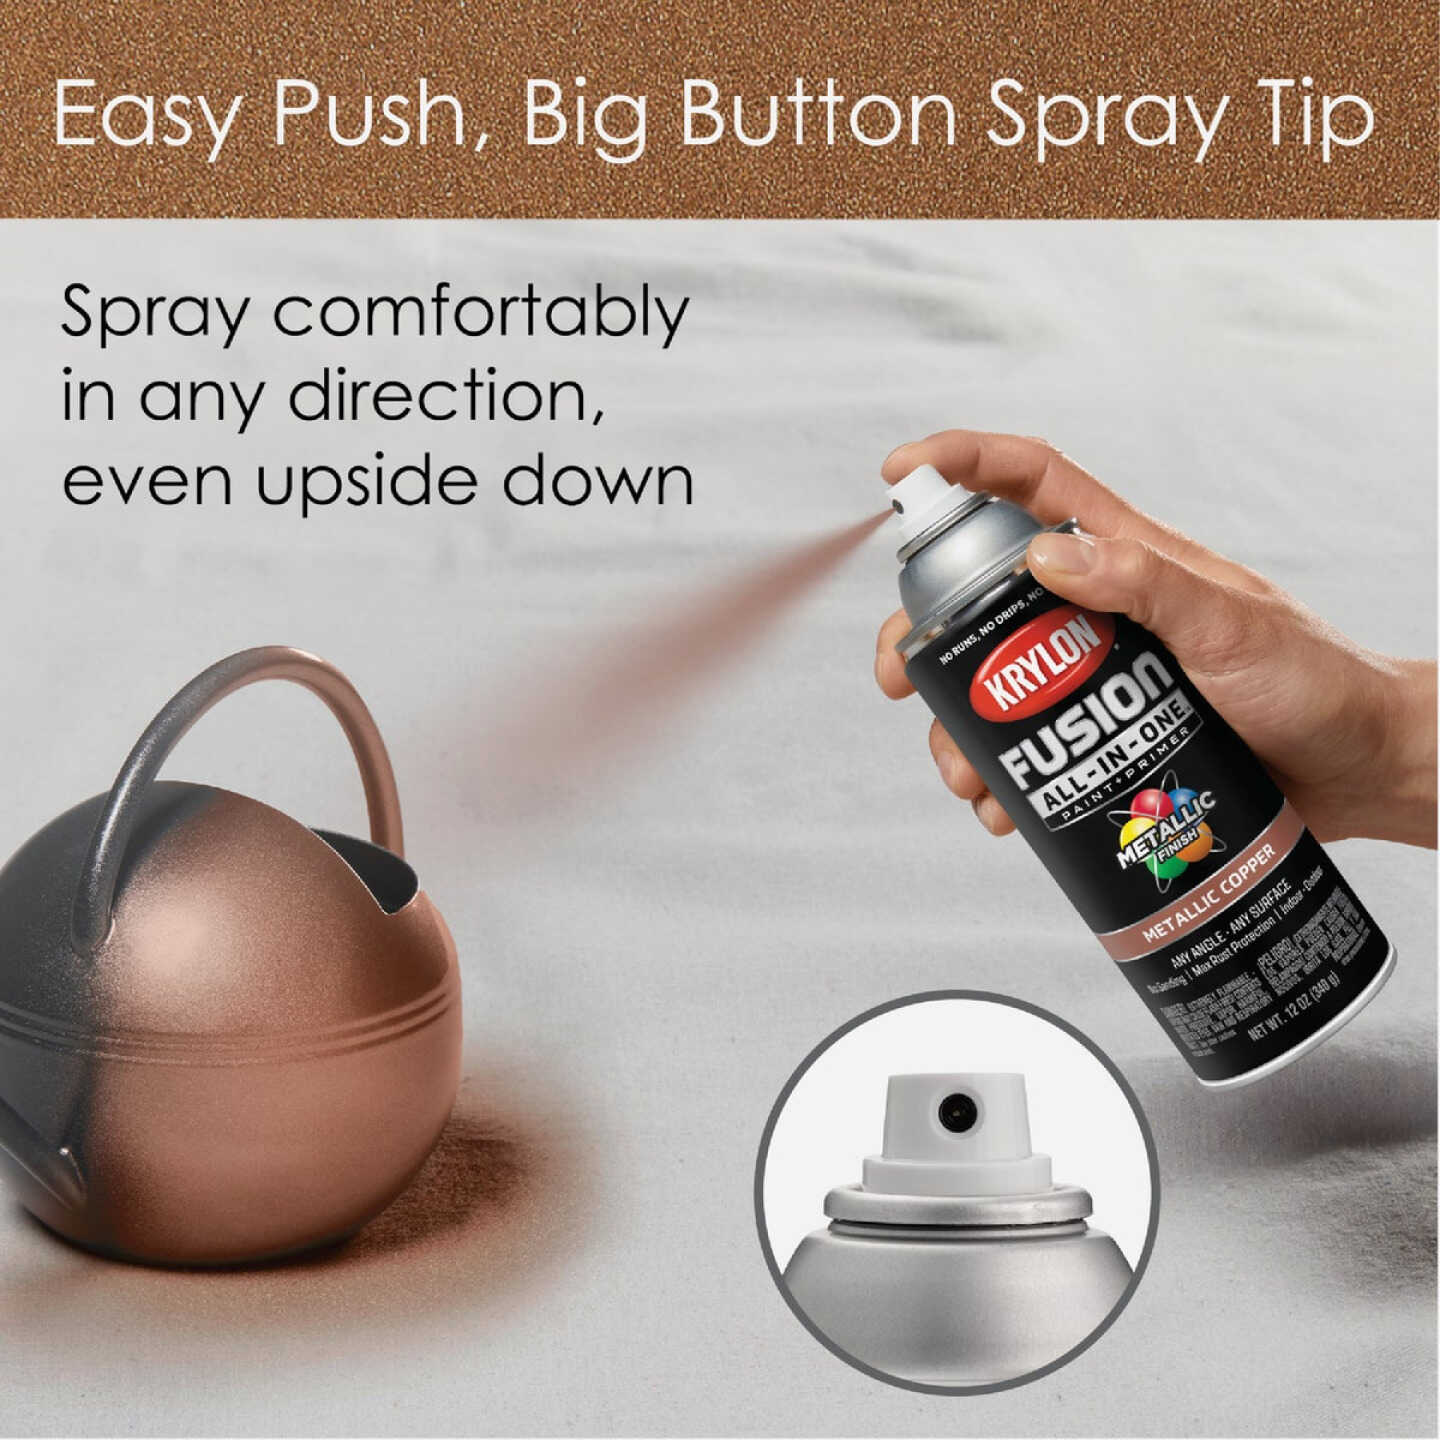 Krylon Fusion All-In-One 12 oz. Satin Spray Paint, Rolling Surf